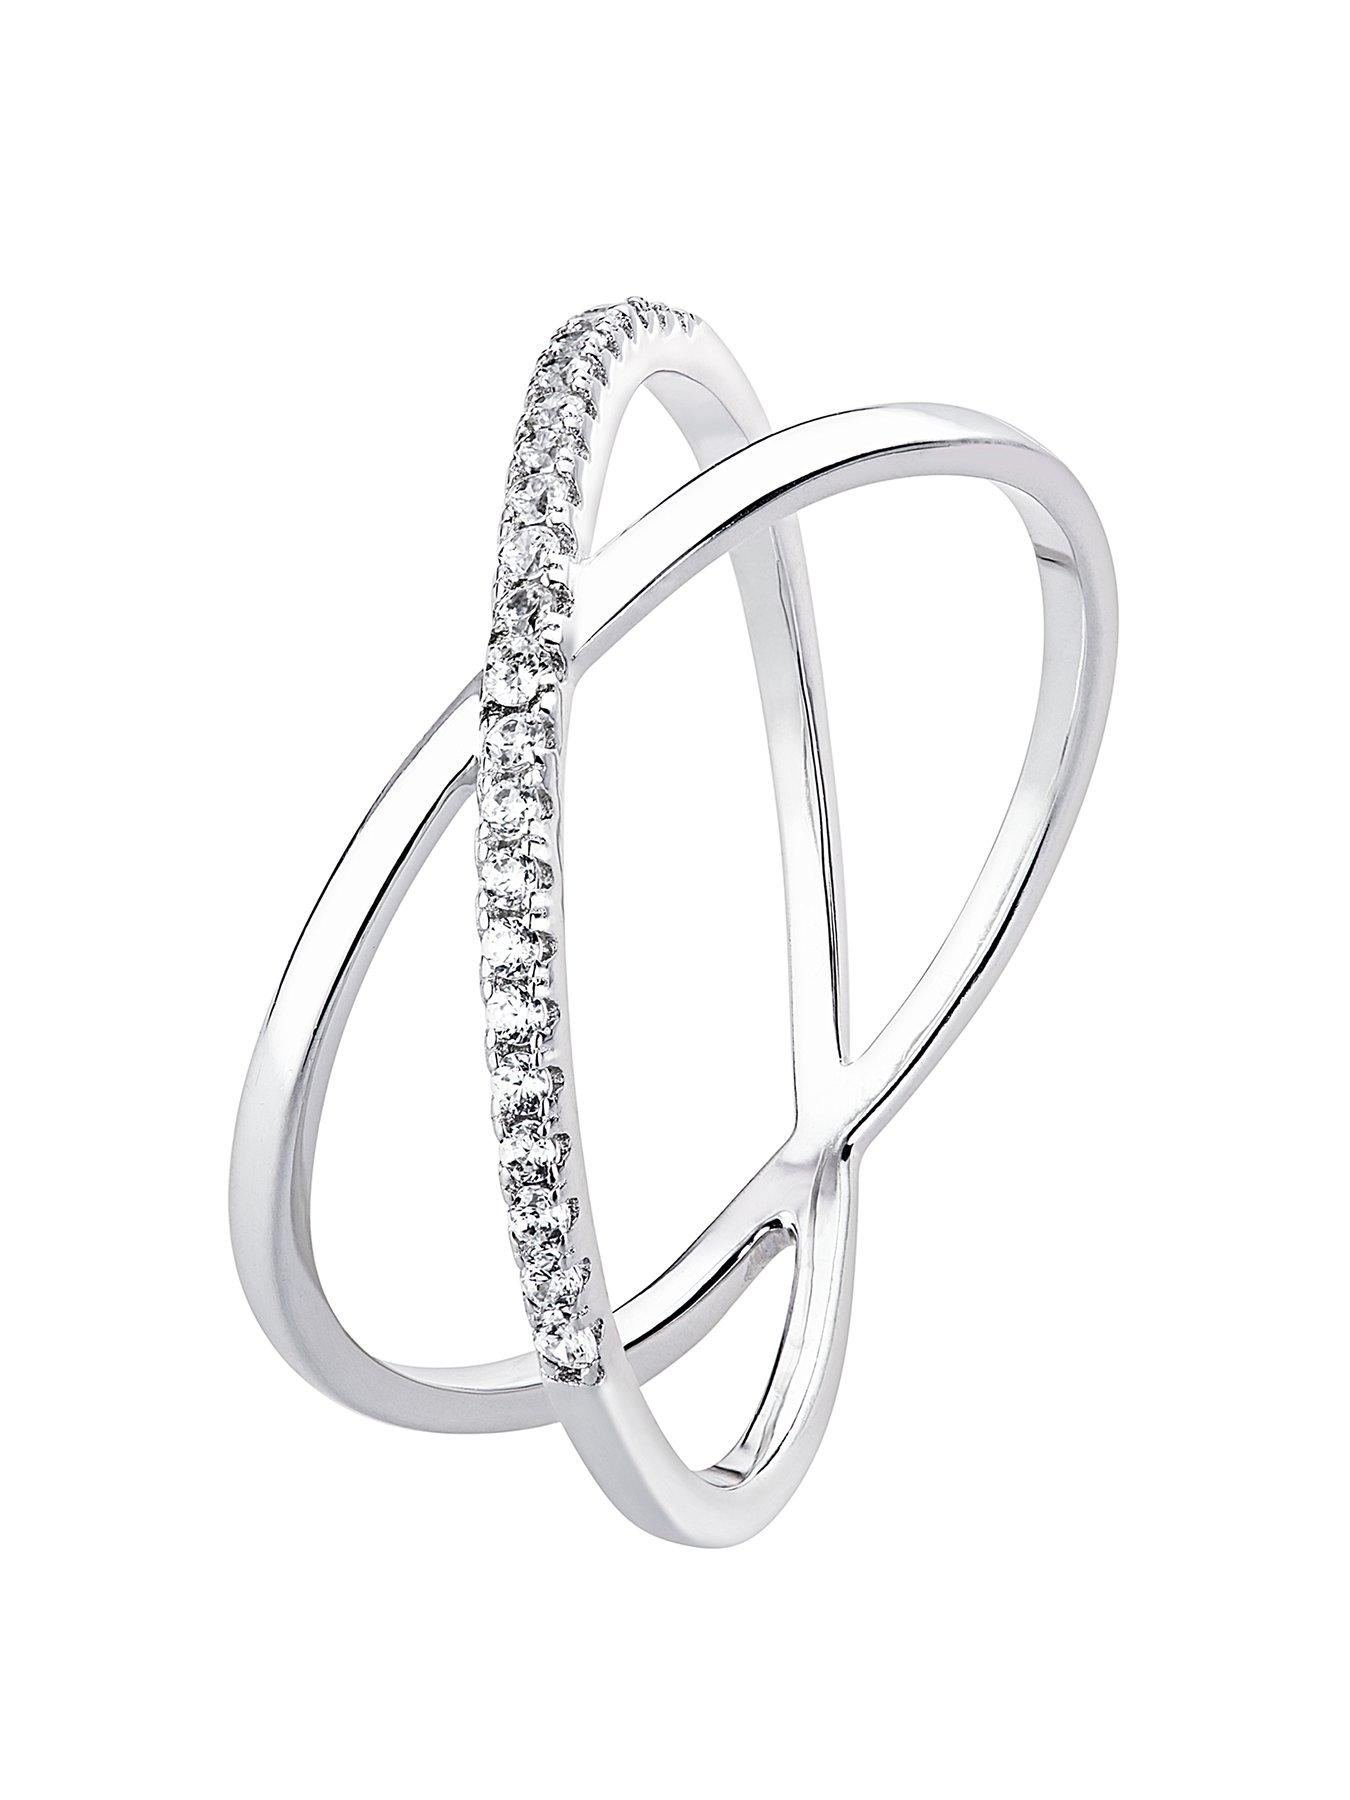 Sterling Silver Crossover Ring Factory Sale, 59% OFF 